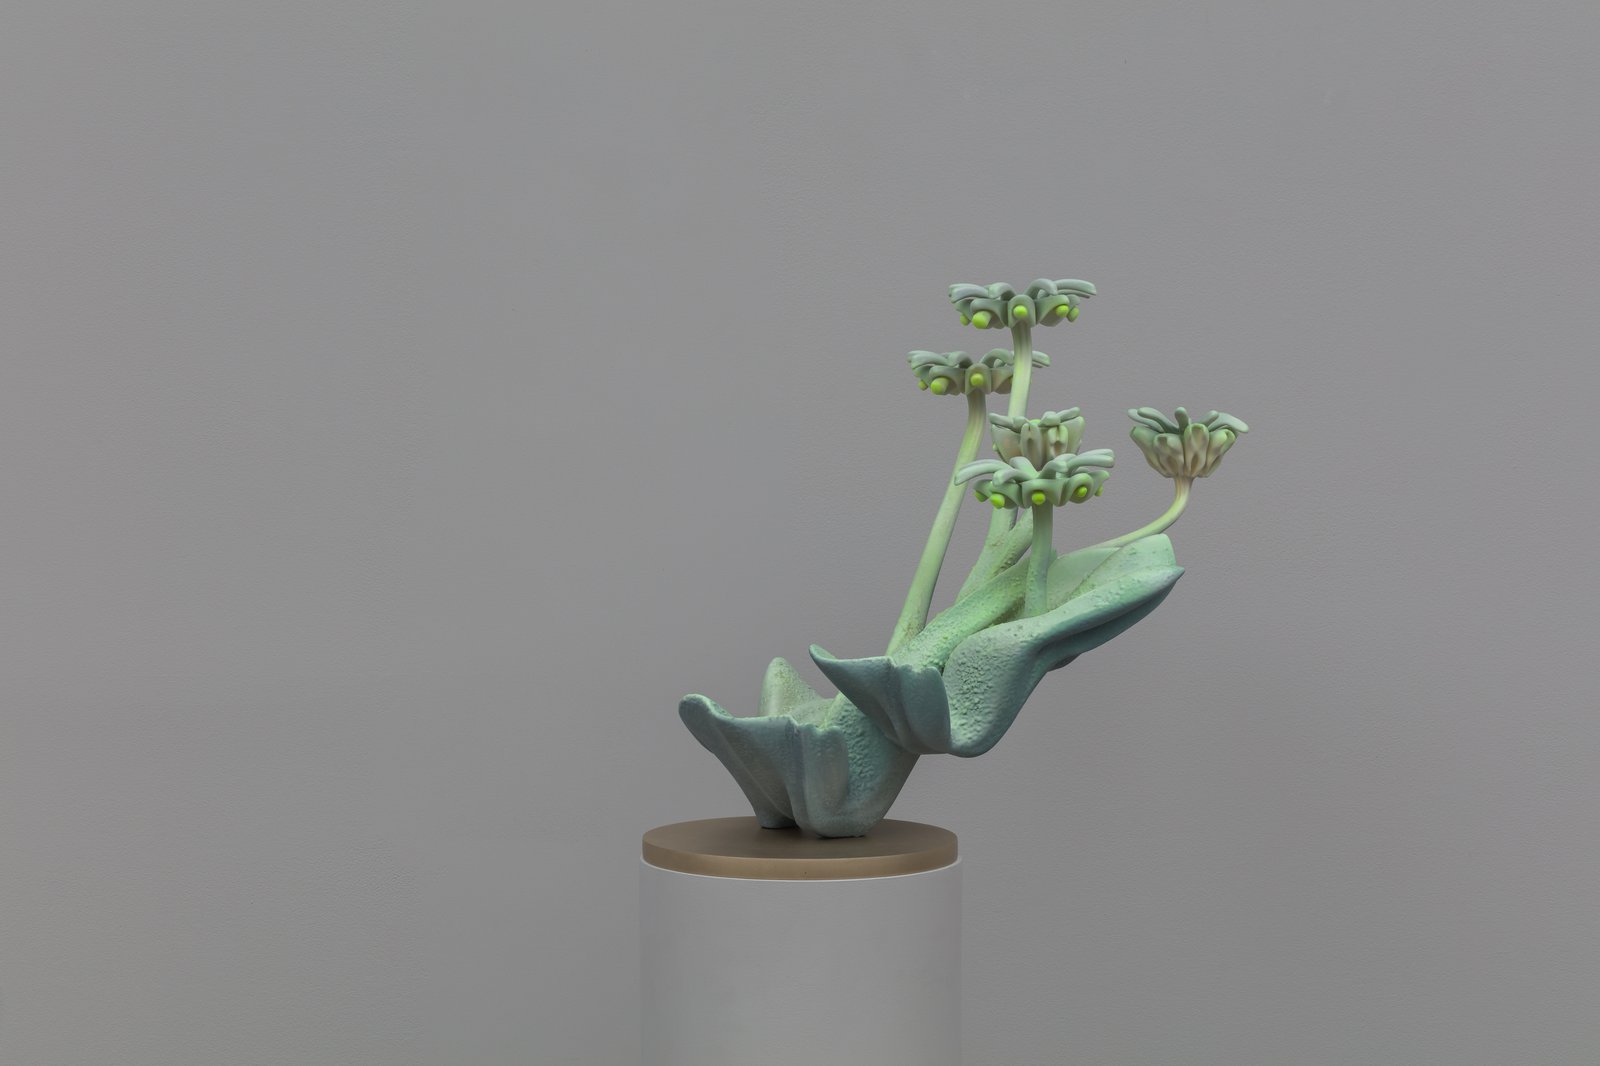 Marguerite Humeau, Marchantia, 2022, alternate view.Wax, sugars, mineral dust, glass, natural extracts, pigments, thermochromic pigments, plant-based and synthetic resin, nylon, bronze, work: 56 x 86.5 x 48.5 cm; overall: 151 x 86.5 x 48.5 cmCourtesy of the artist and CLEARING